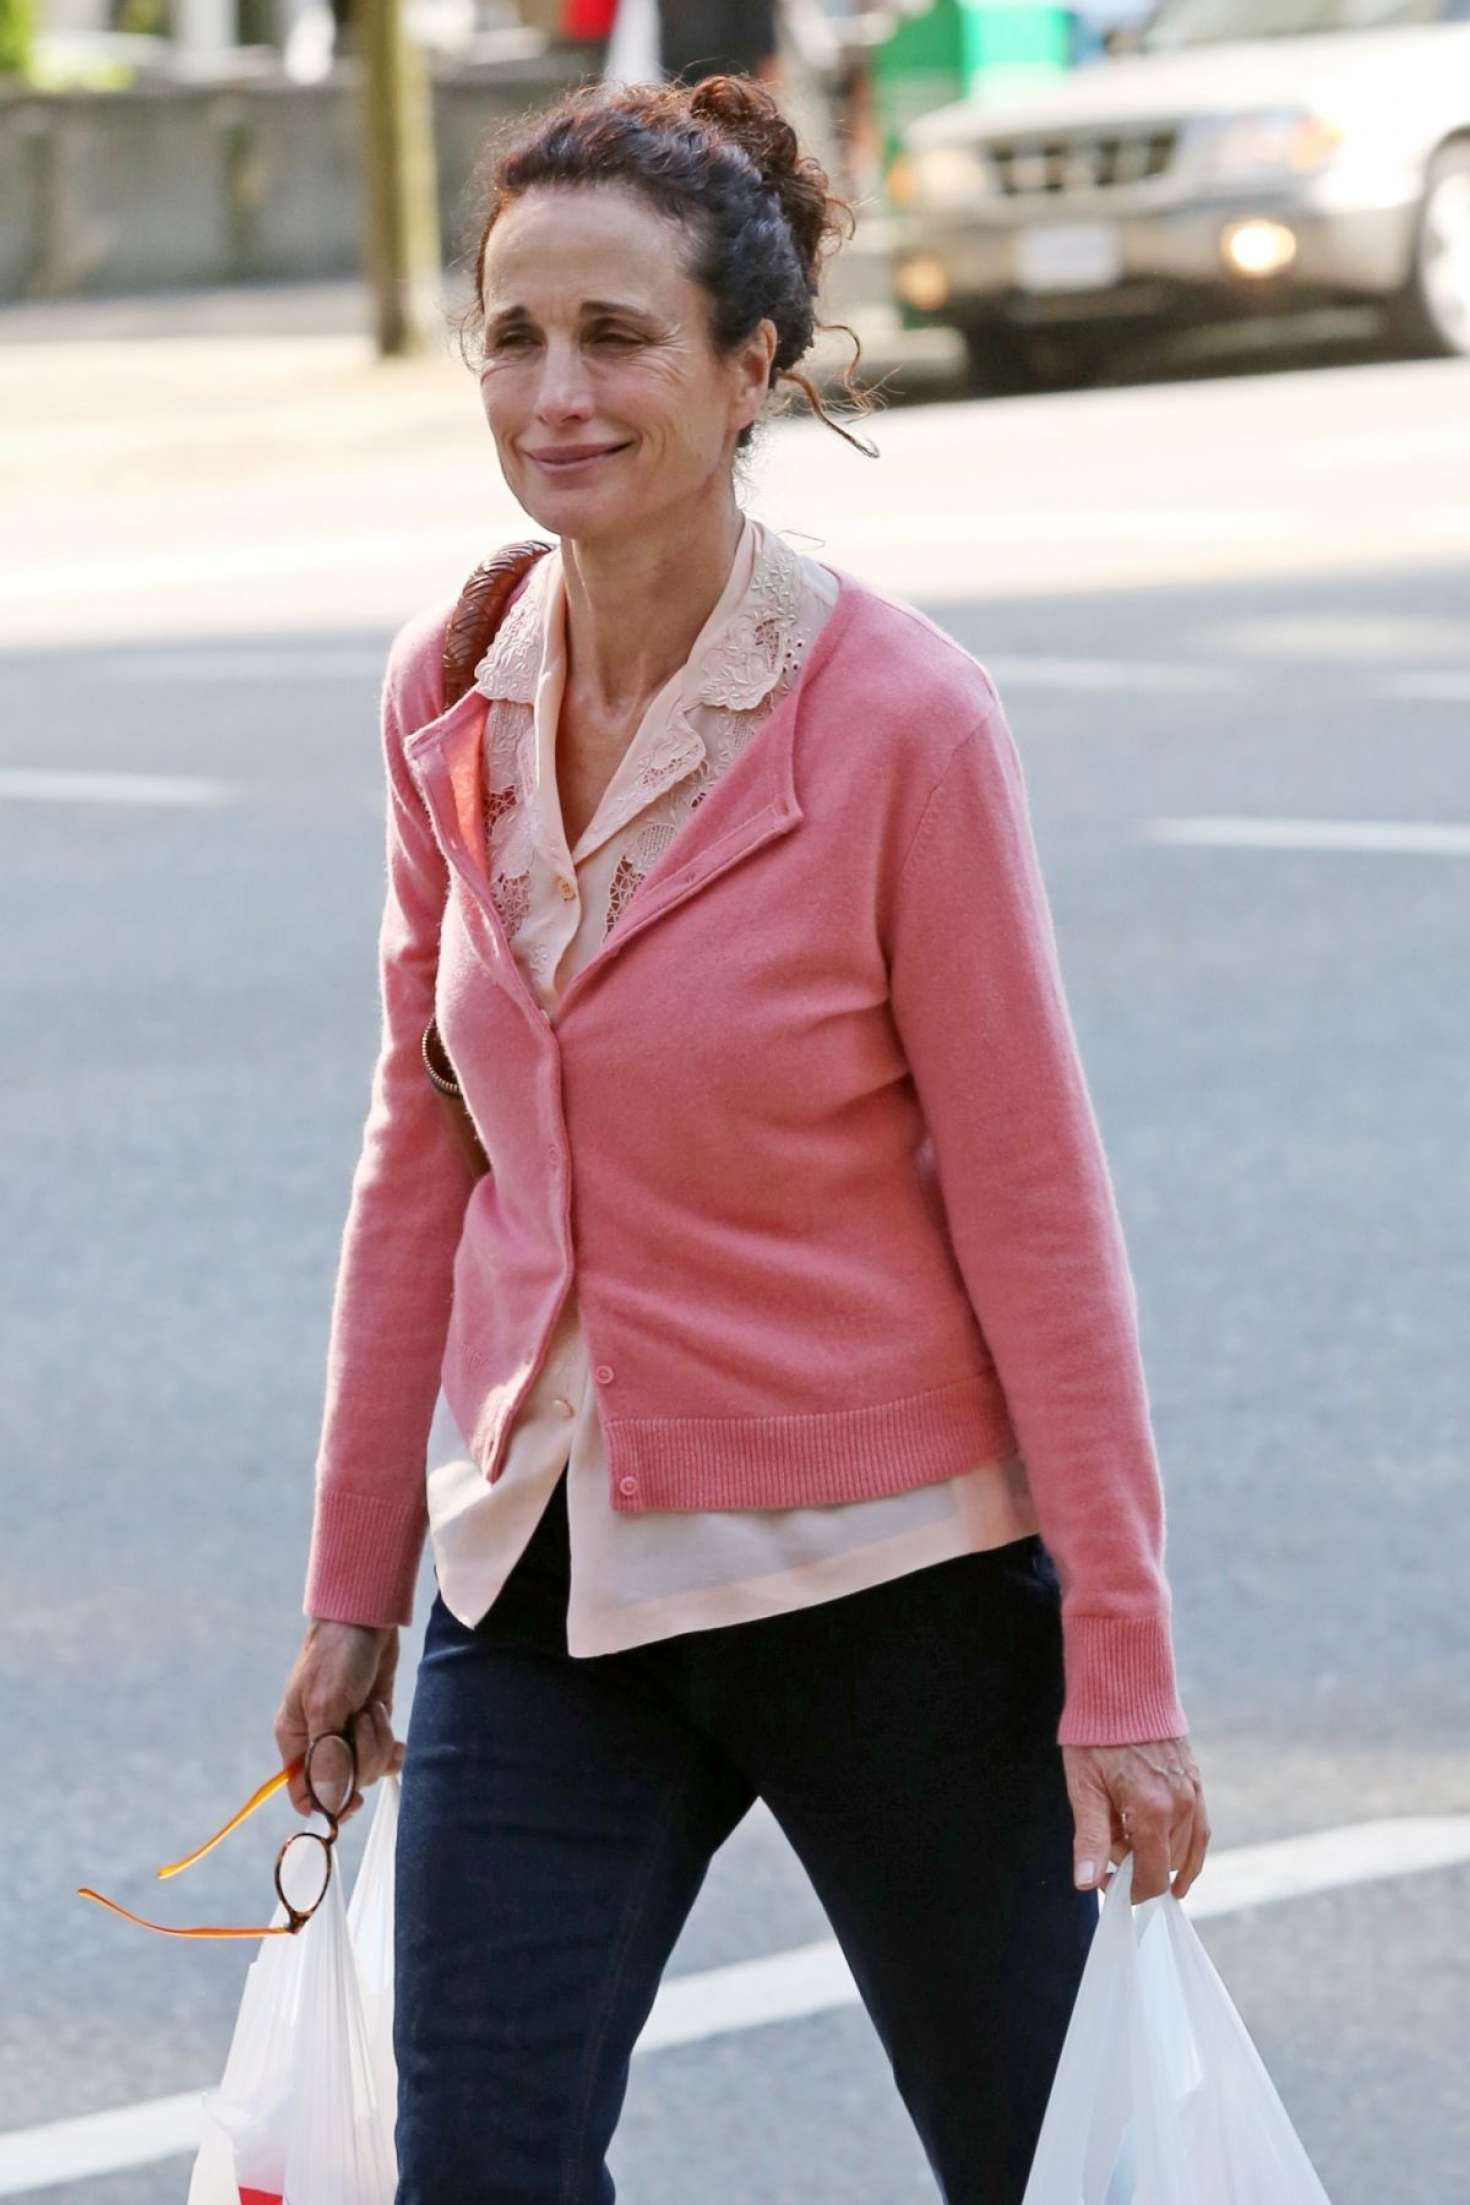 Andie Macdowell Out Shopping in Vancouver | GotCeleb1470 x 2205